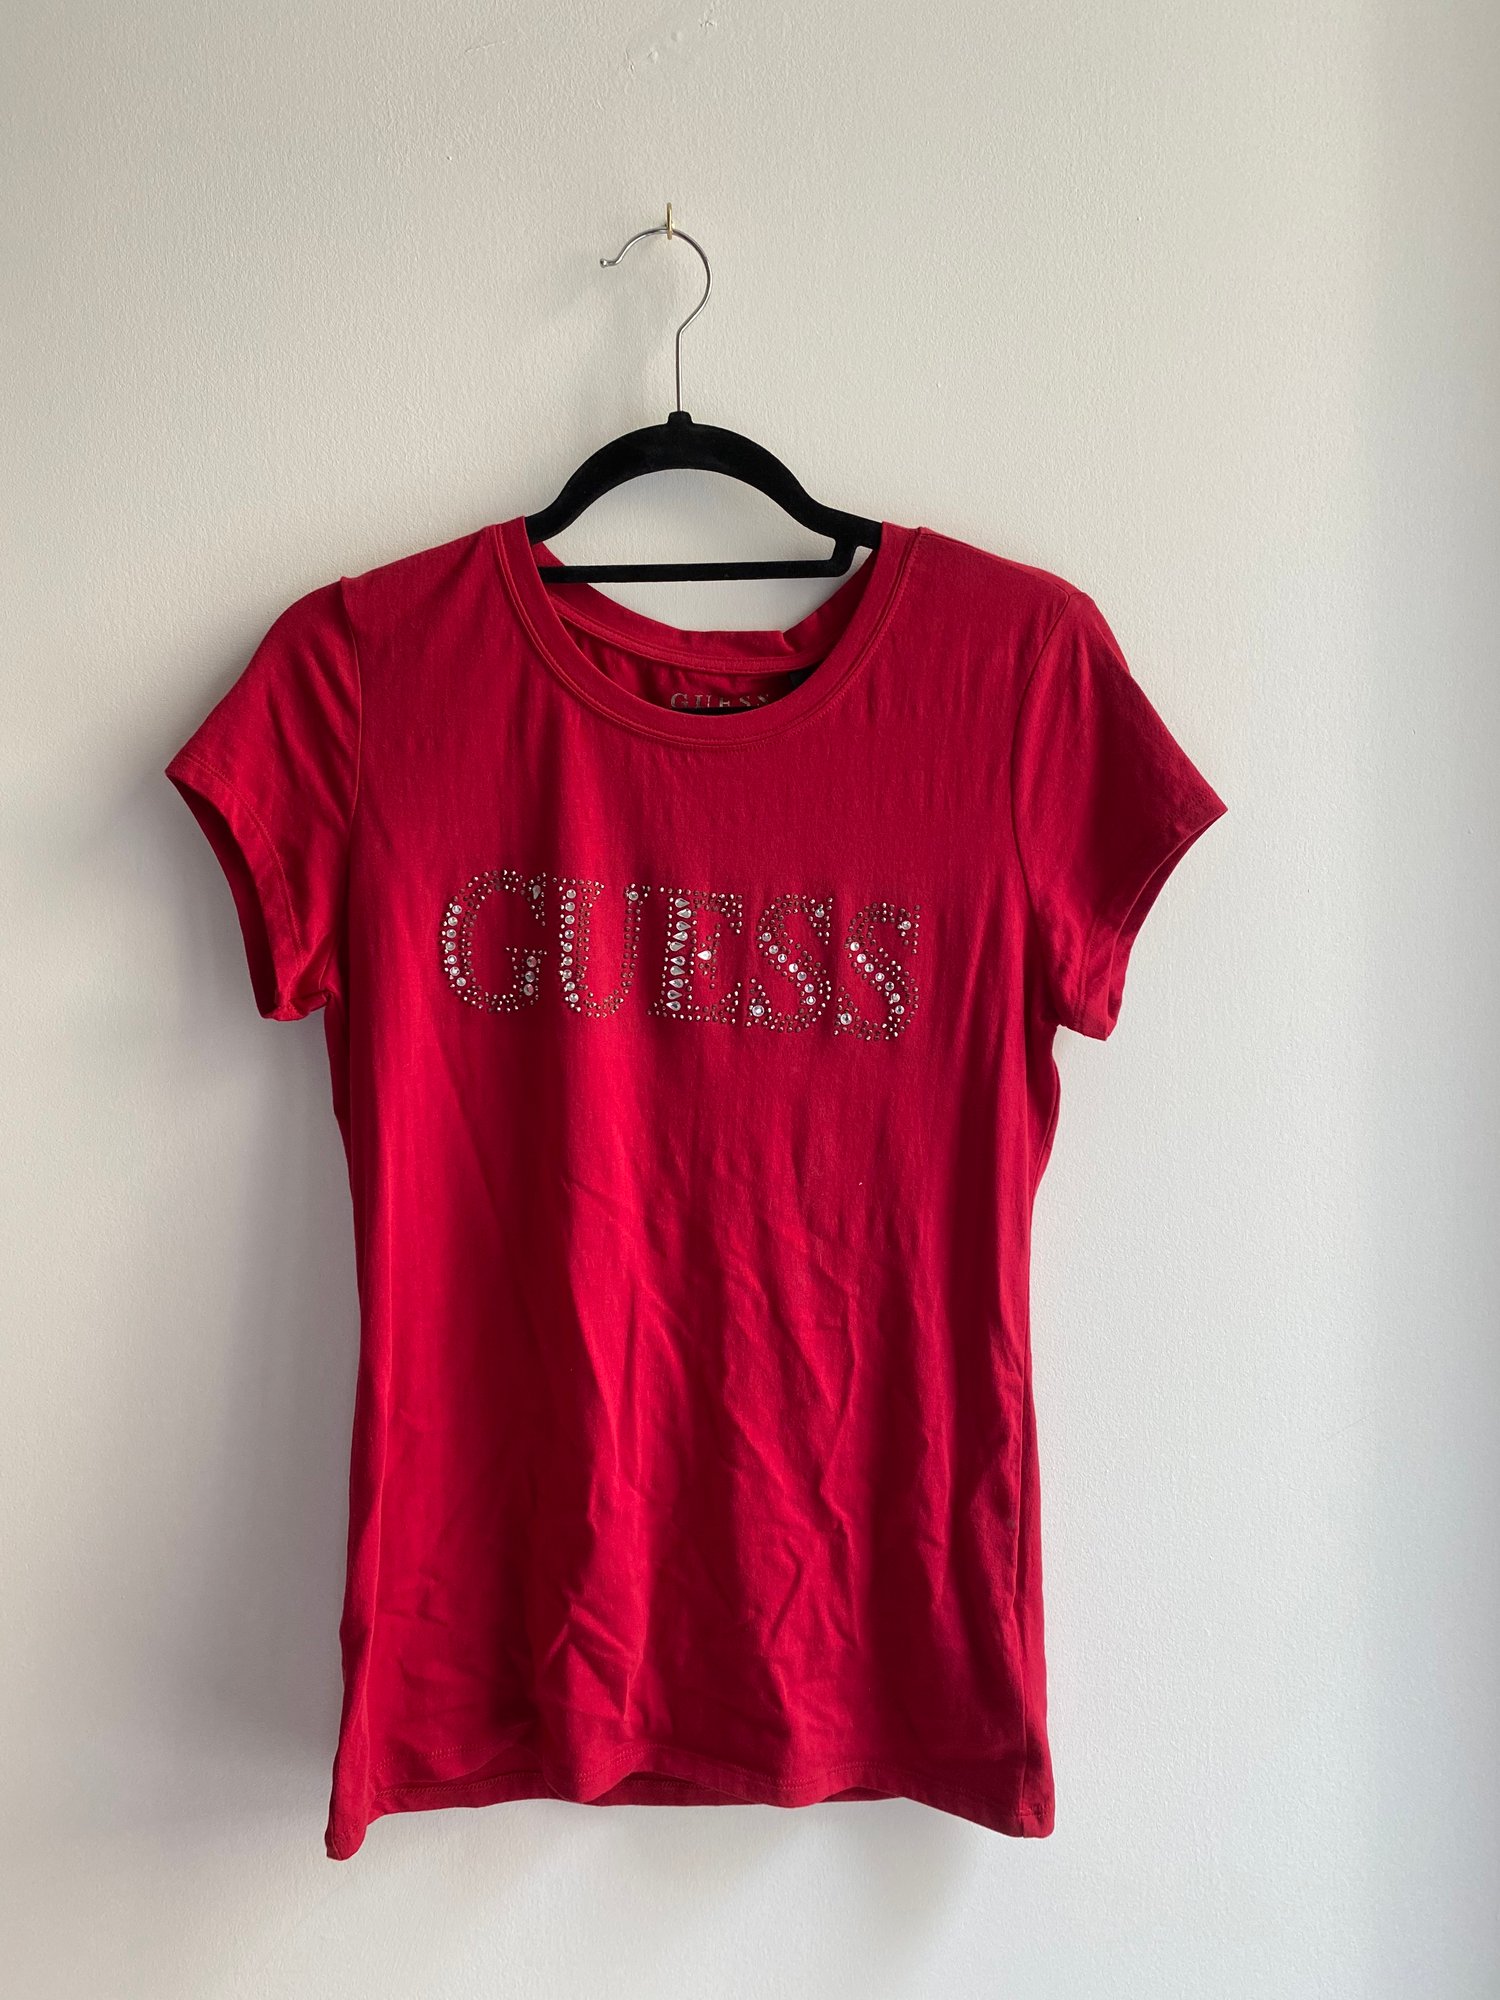 Guess bedazzled tee